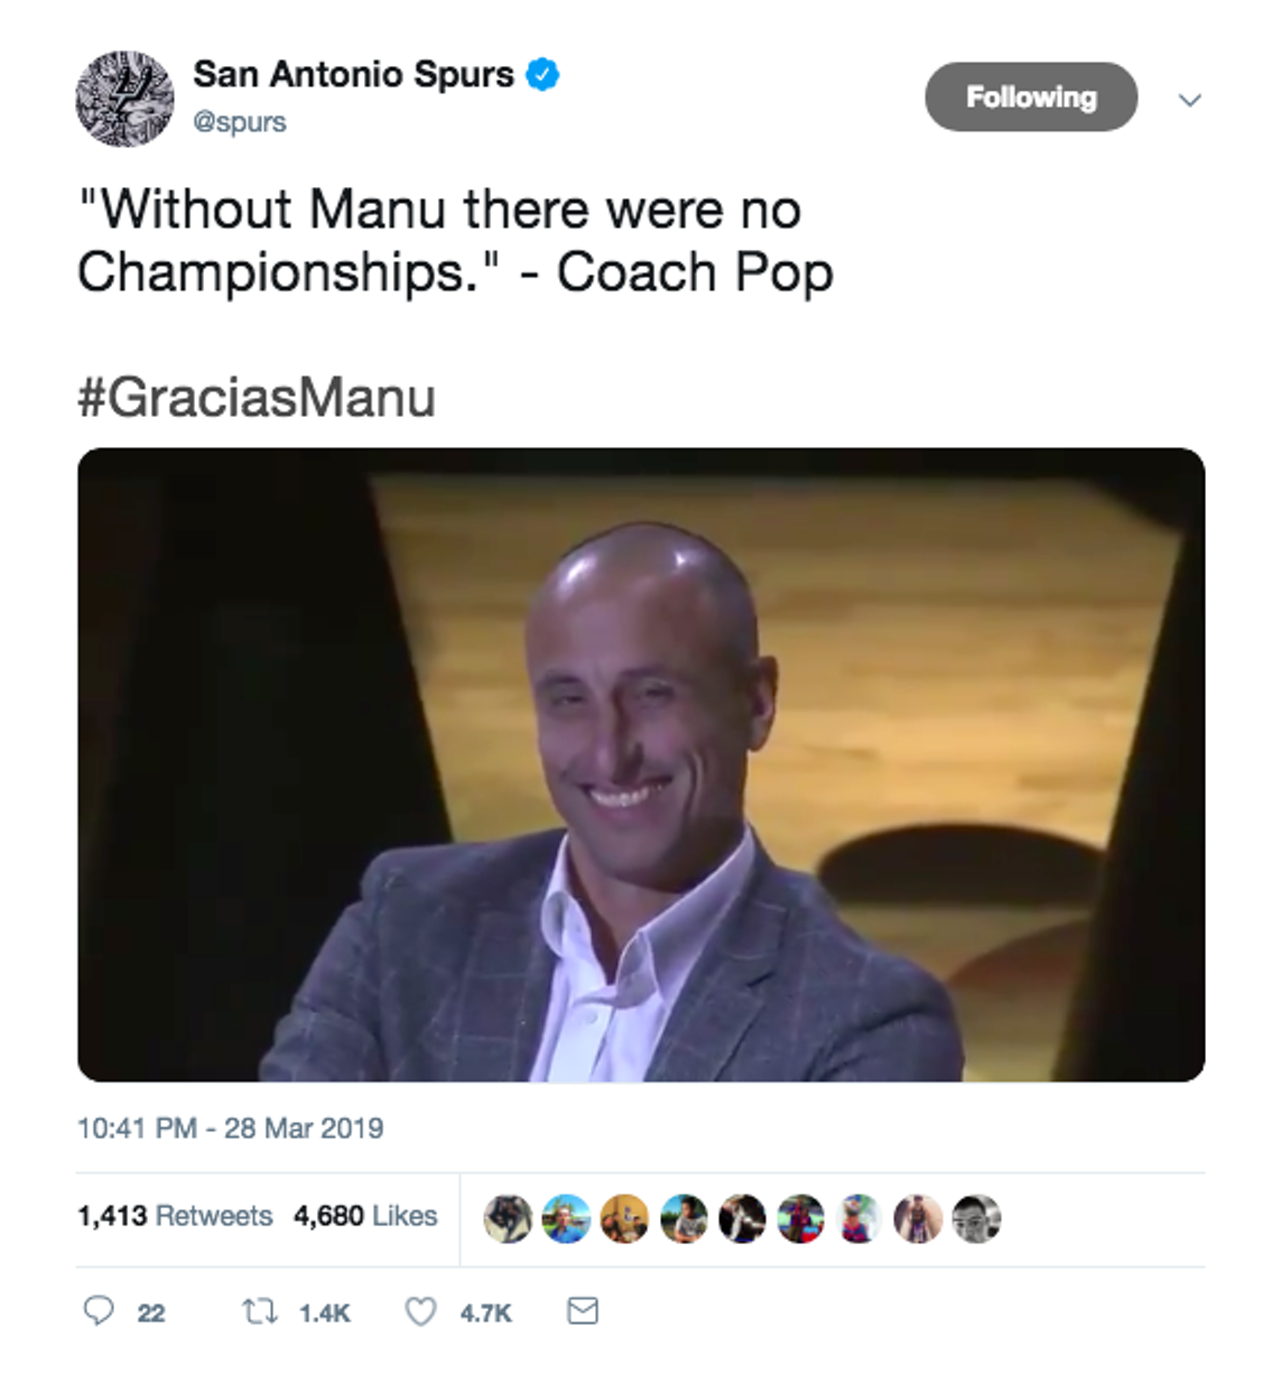 Coach Pop said the Spurs secured four of their five championships because of Manu
Source